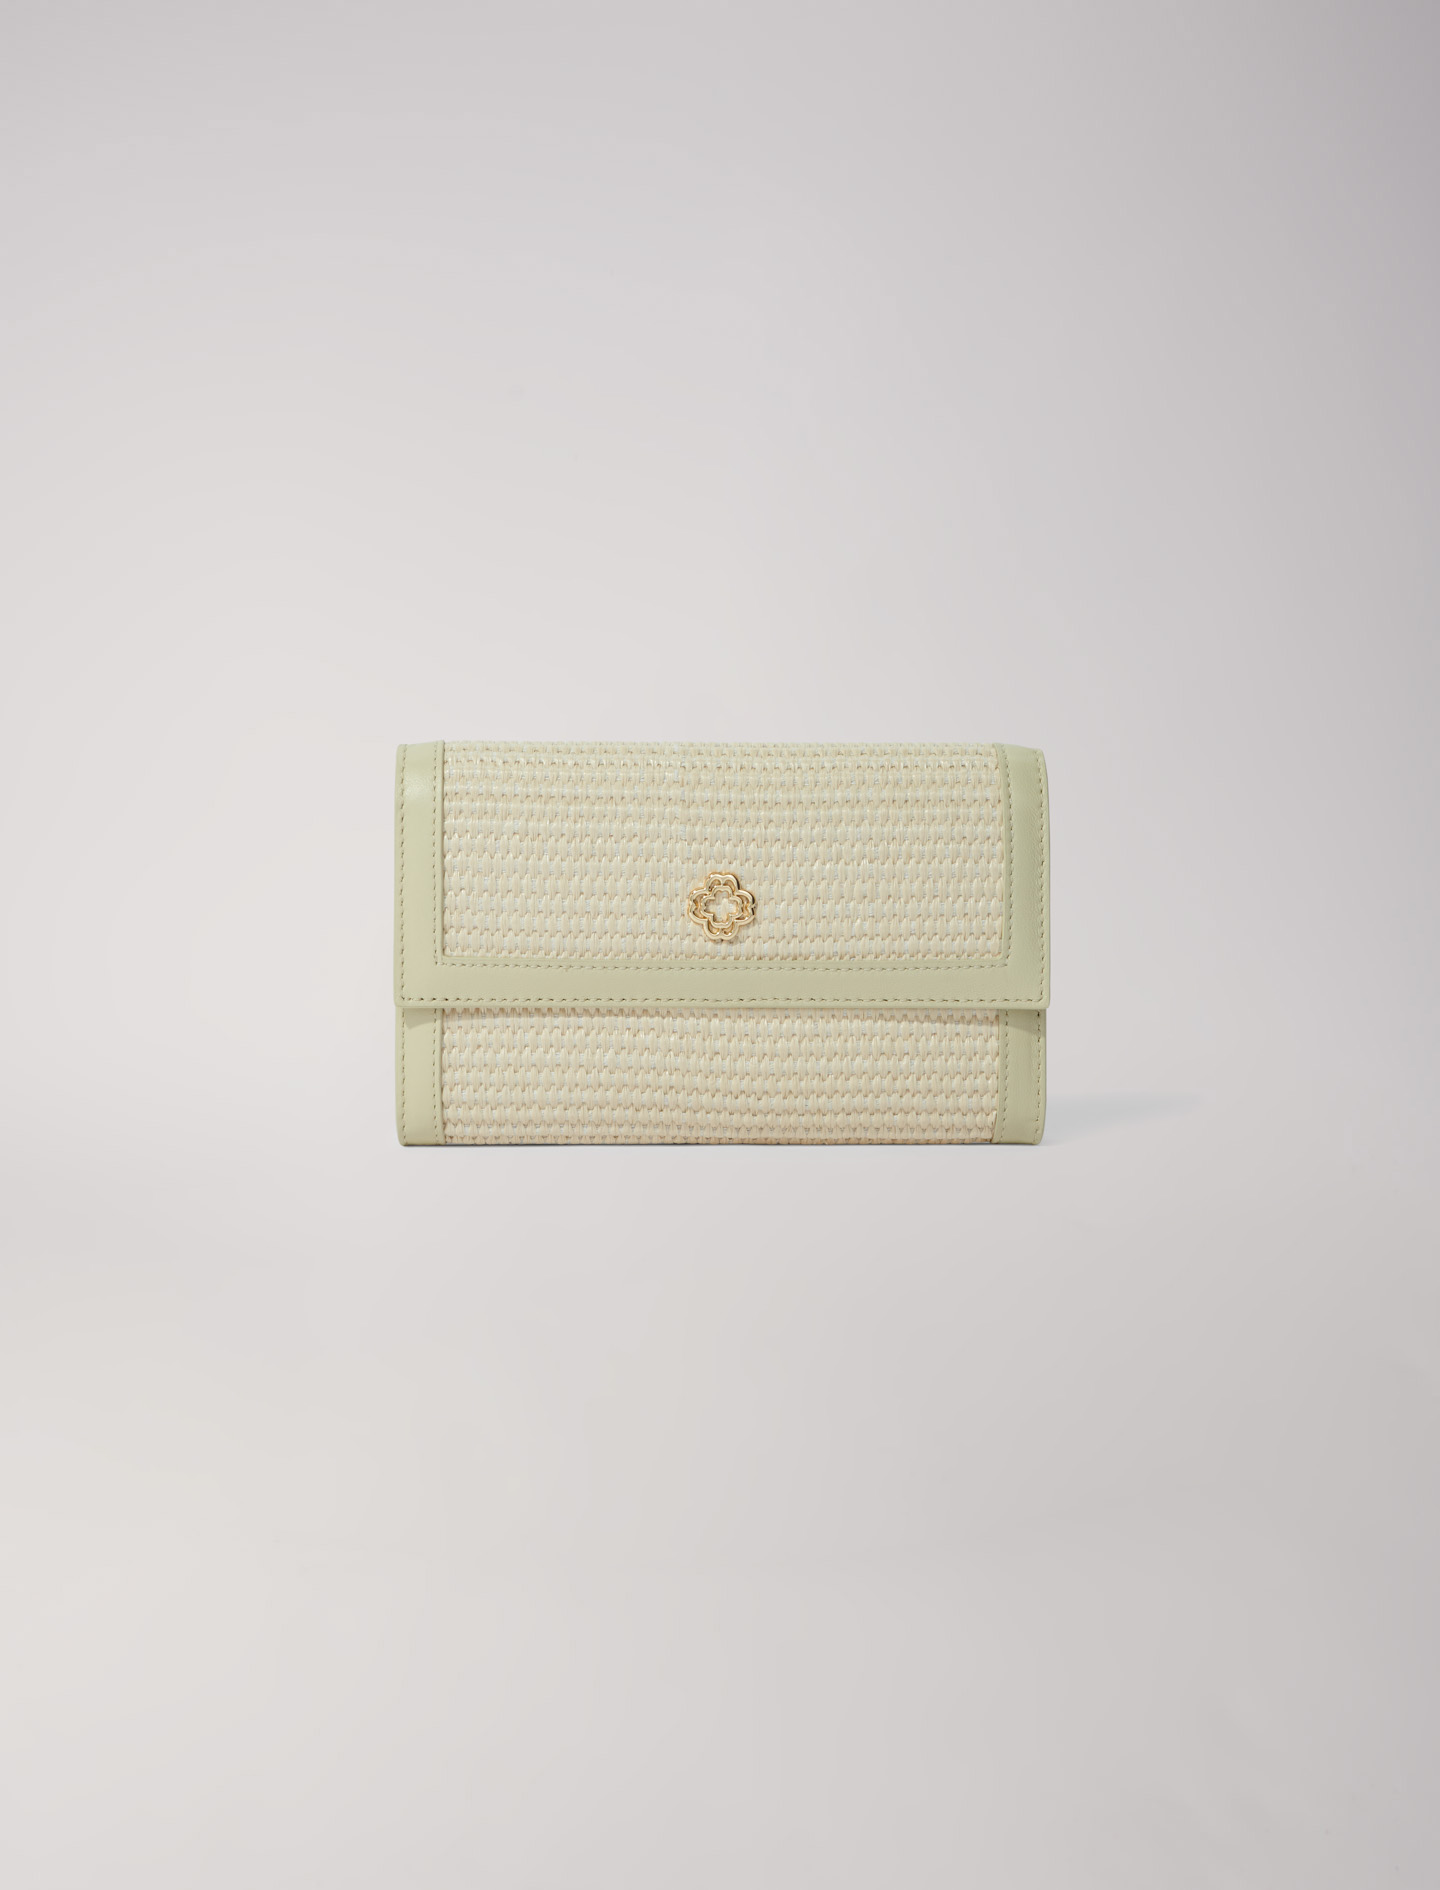 Mixte's polypropylene, Raffia-effect clutch bag with chain, size Mixte-Small leather goods-OS (ONE SIZE), in color Beige / Beige